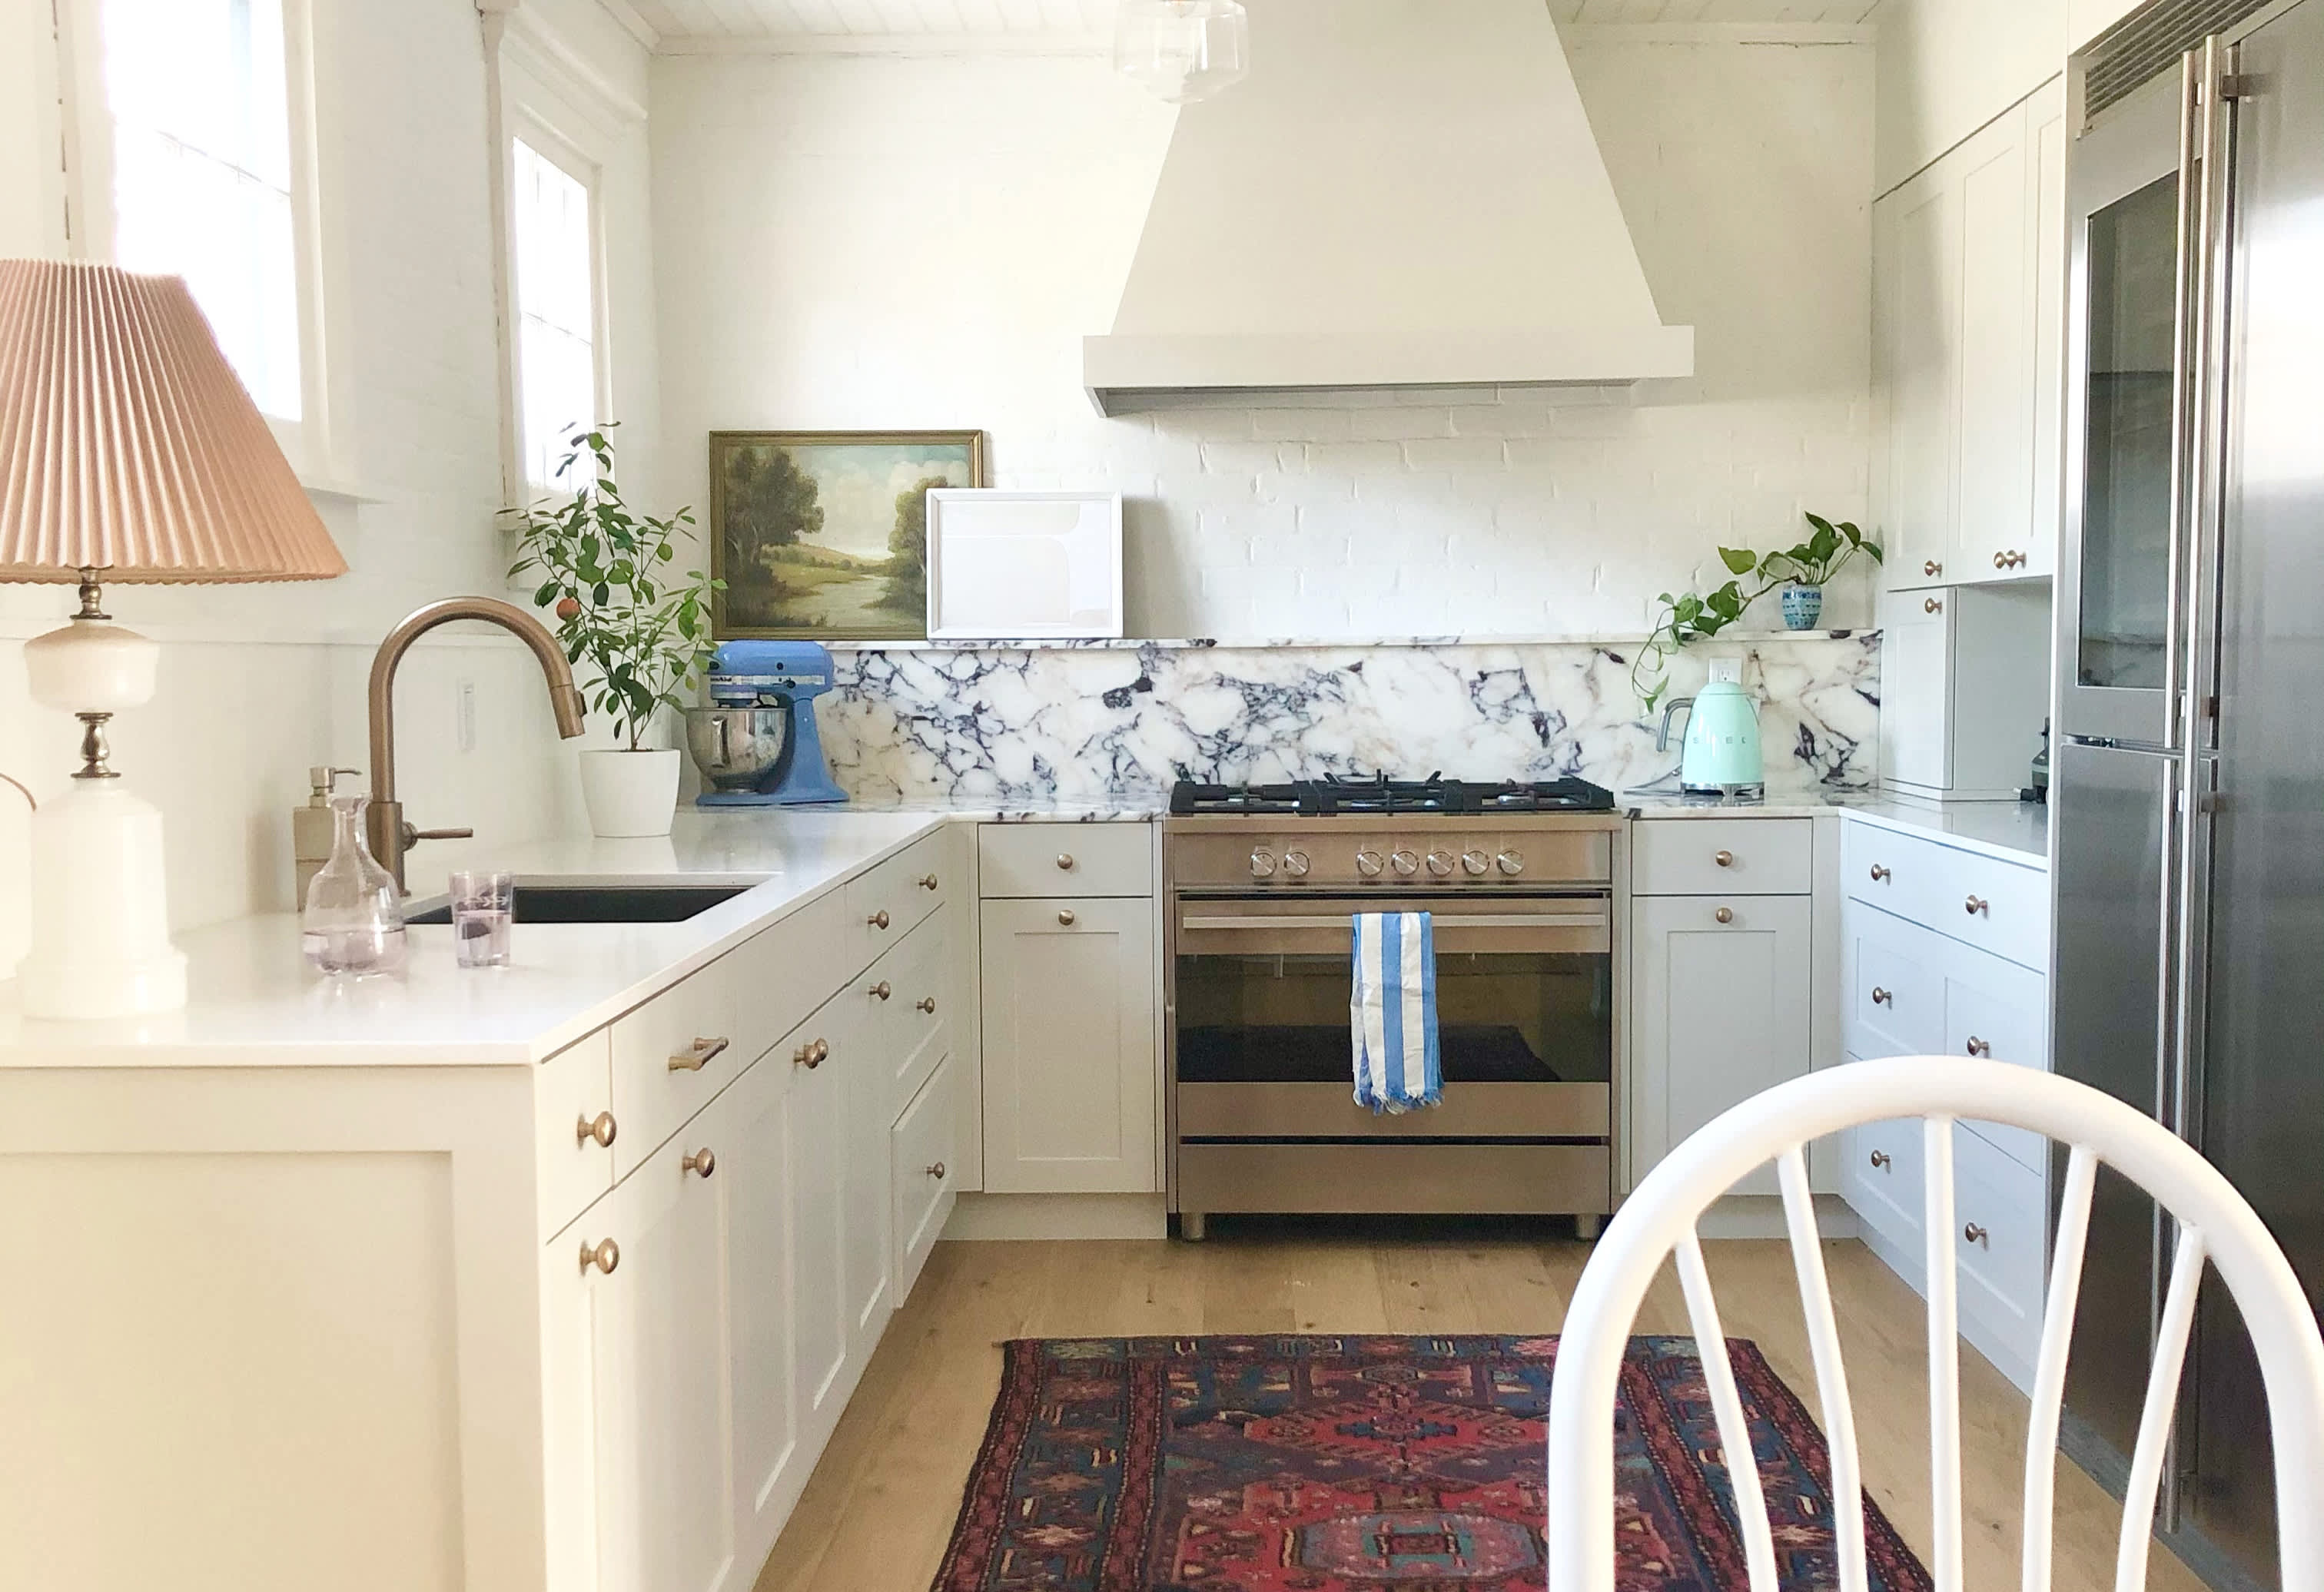 I really wanted to break up all the white in this kitchen, and I